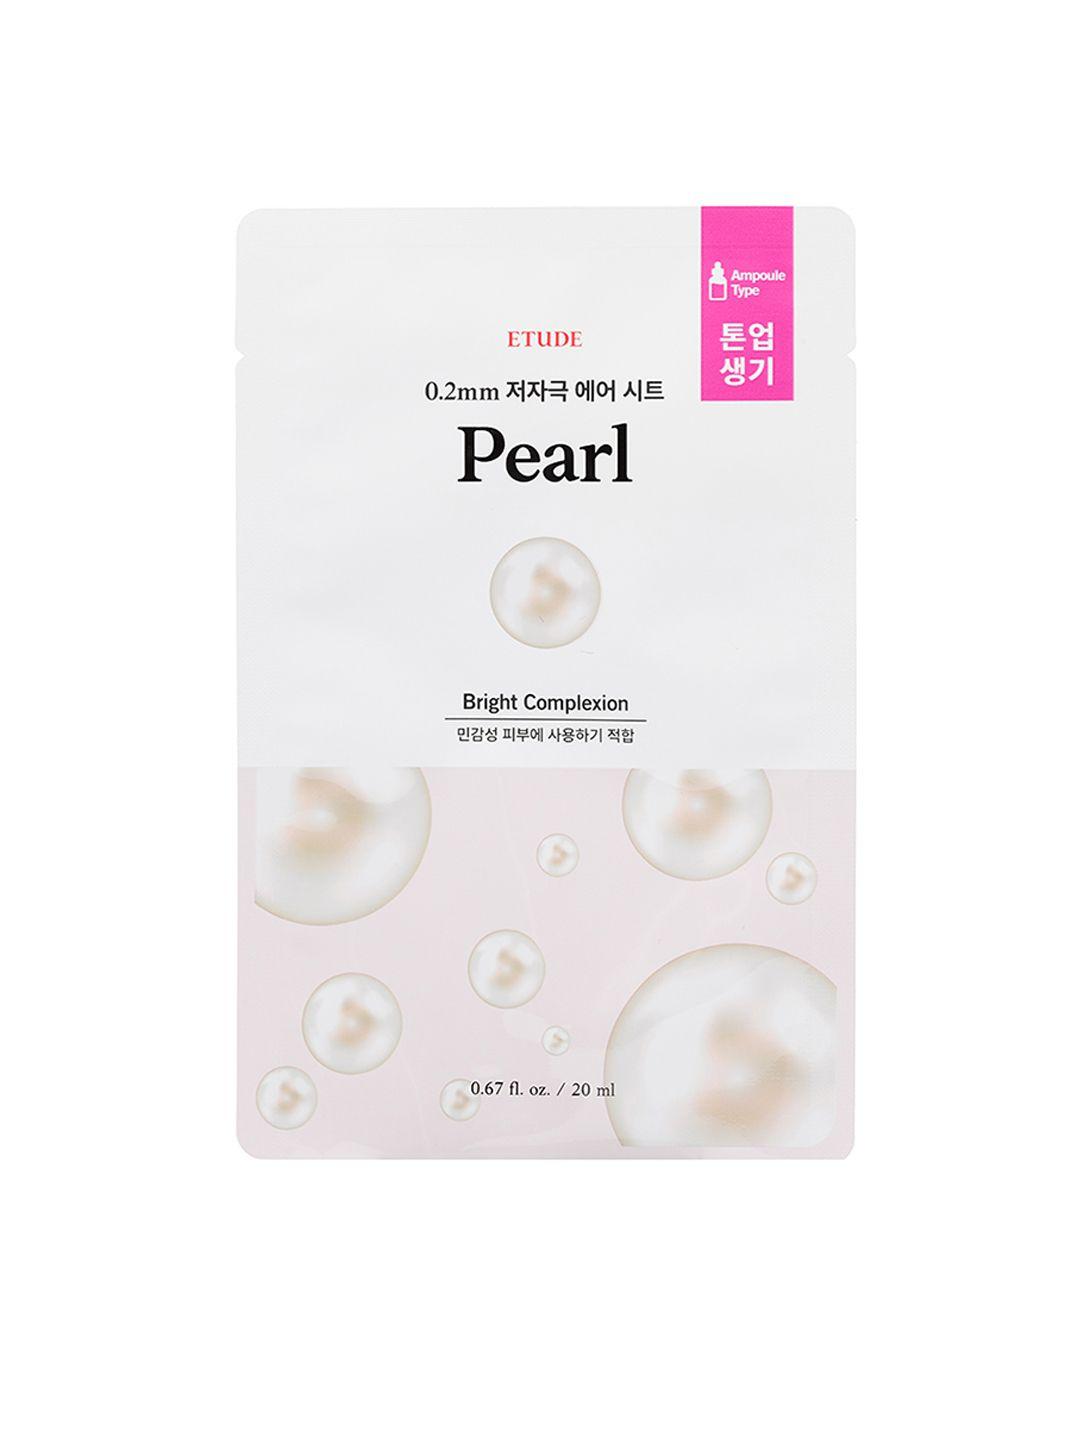 etude-bright-complexion-0.2mm-air-mask---pearl